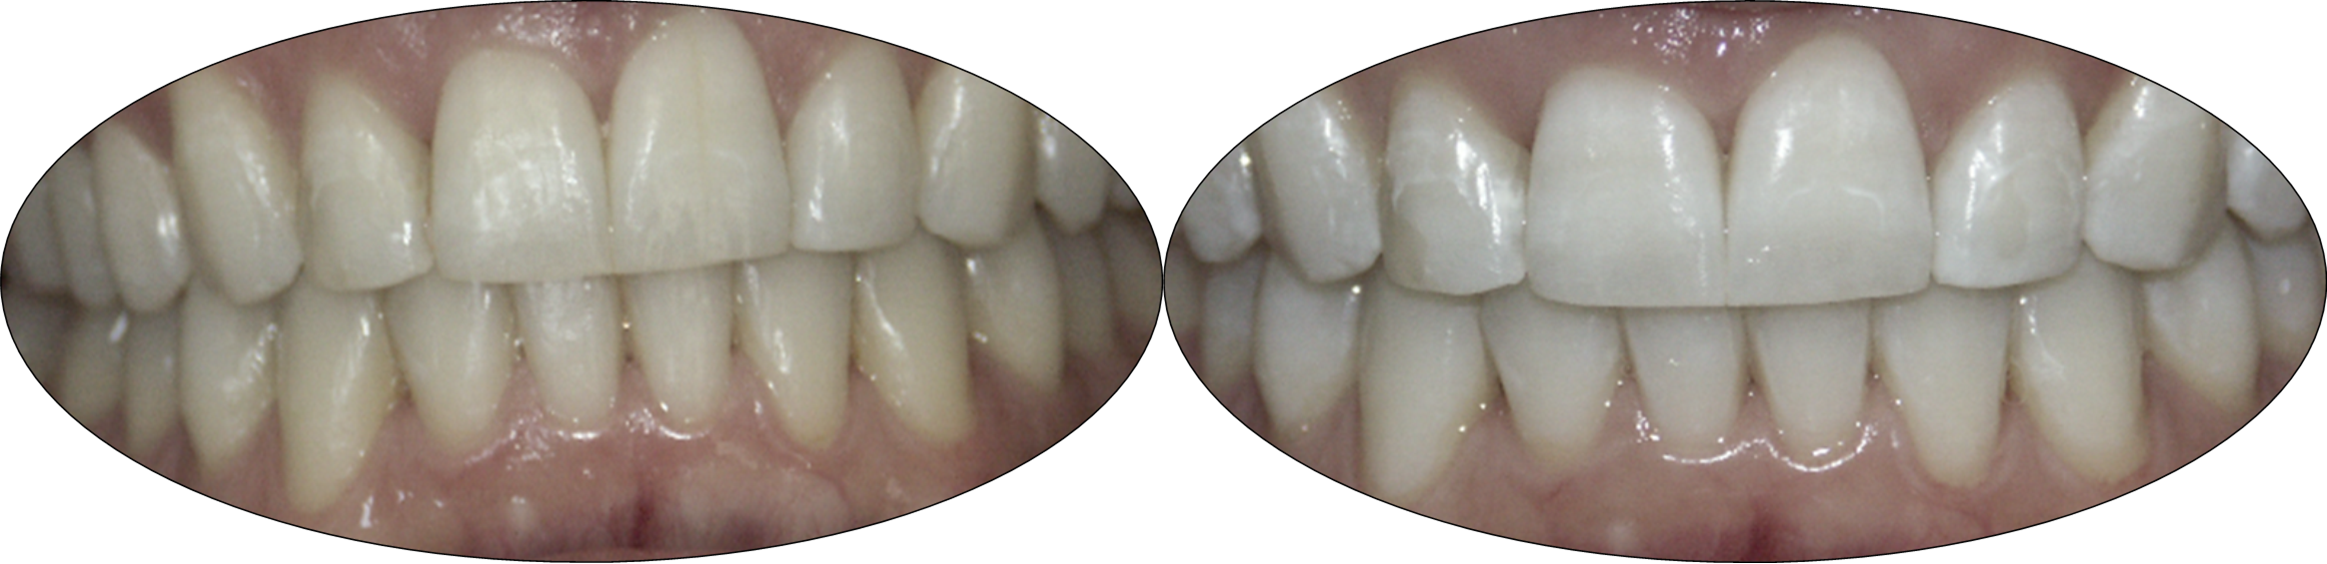 Before and after images of Zoom teeth whitening patient